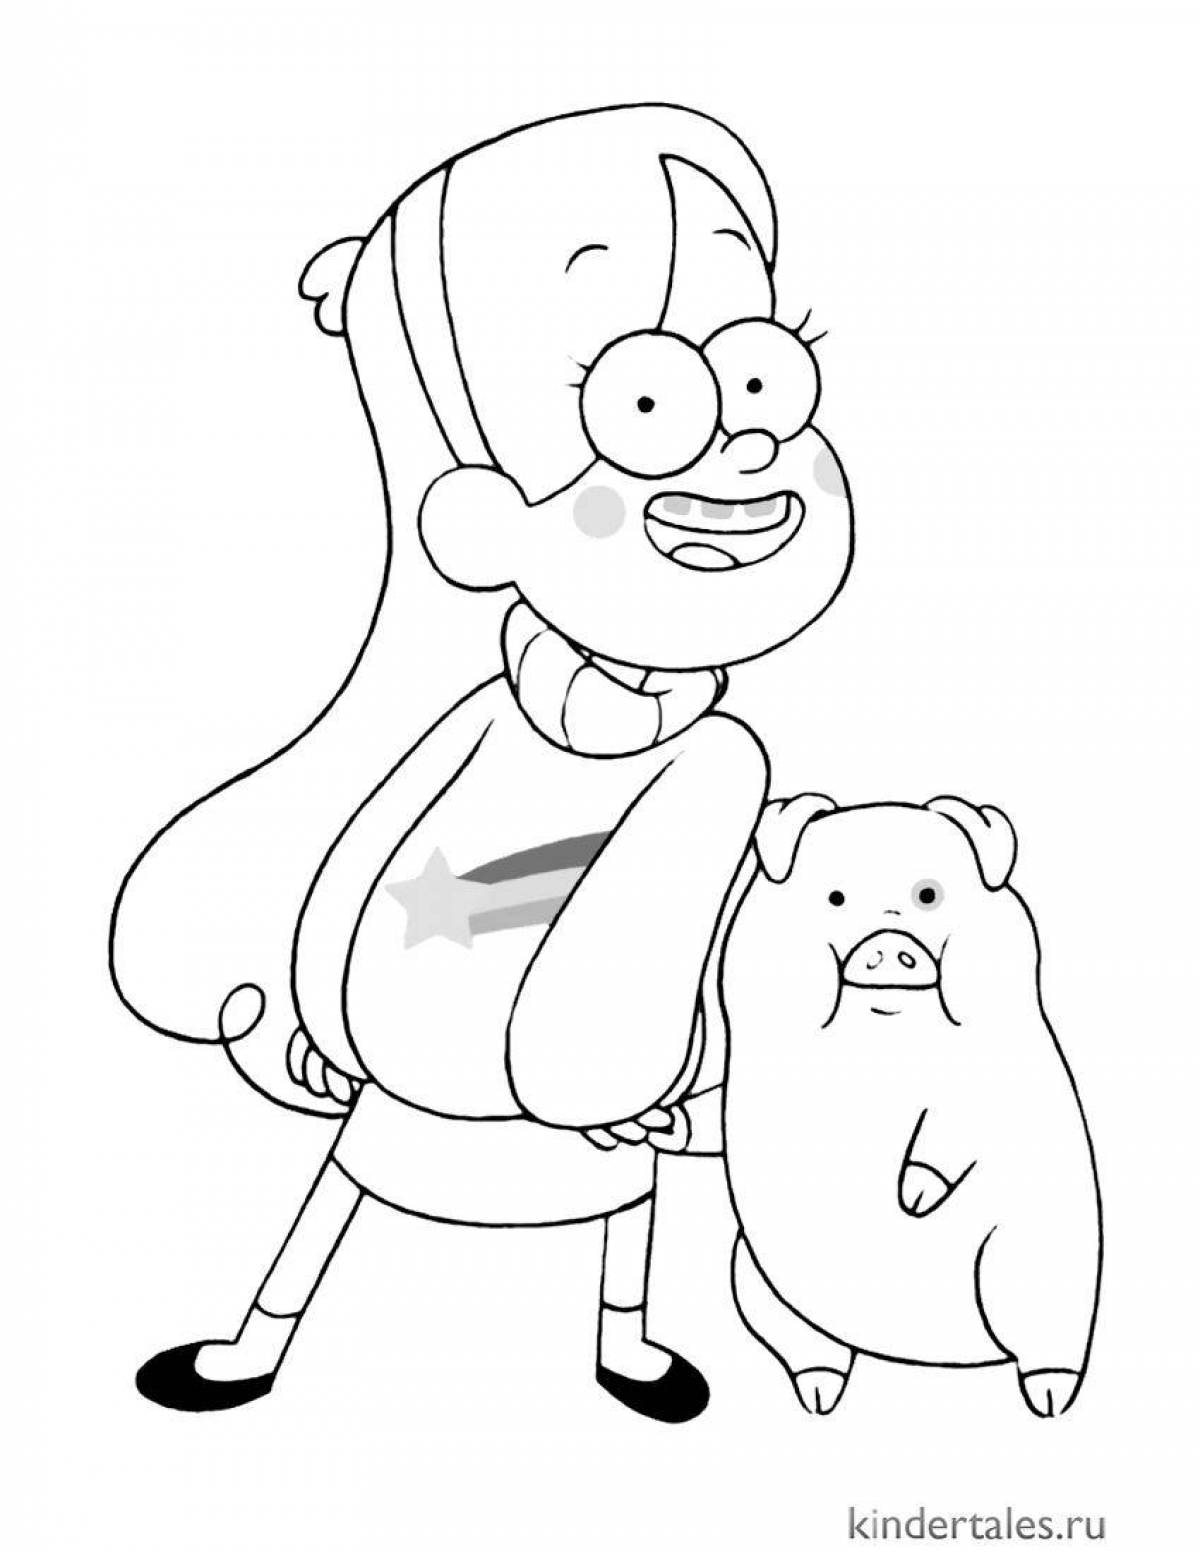 Mabel coloring pages, crazy coloring